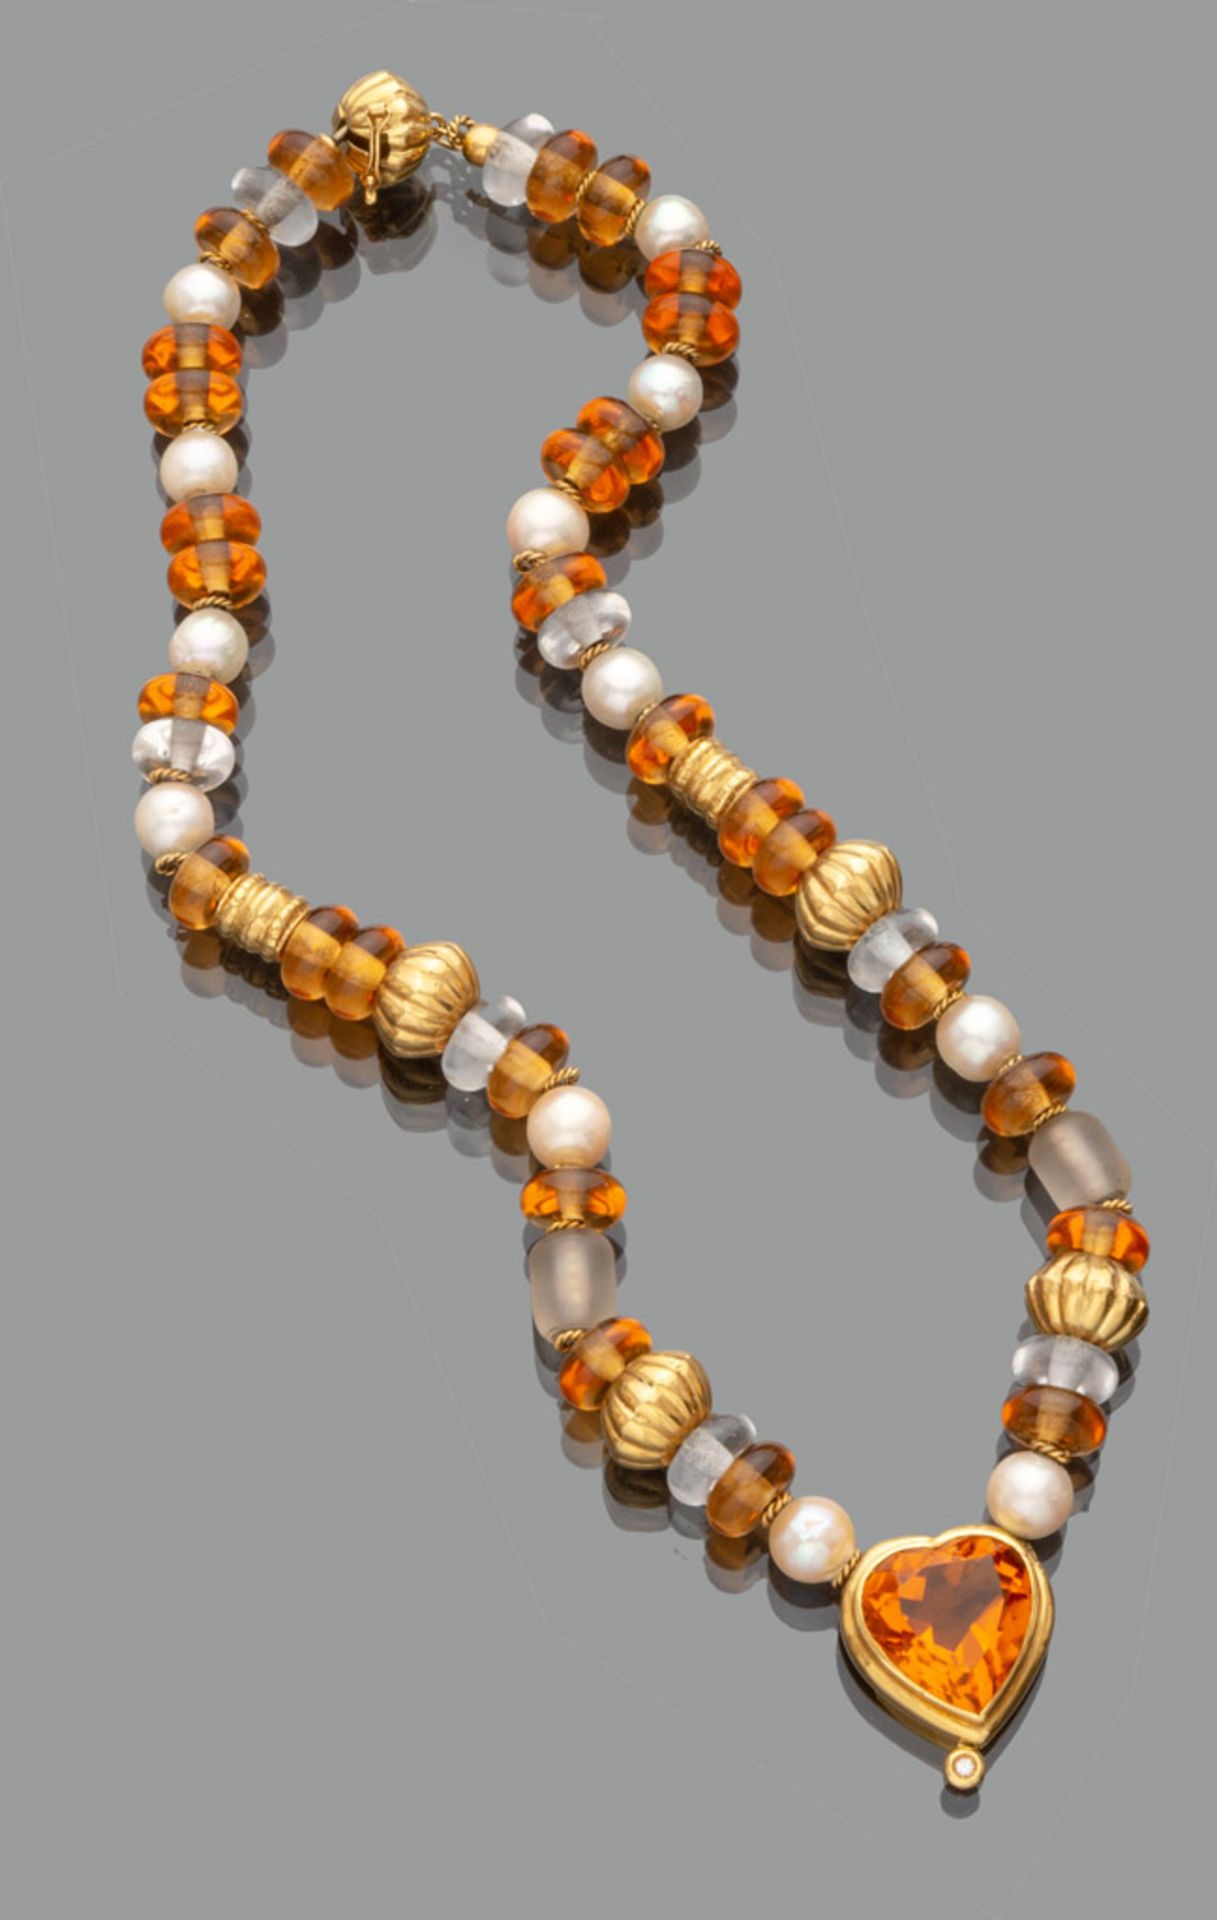 NECKLACE with pearls, glass and topazes with separators in gold 18 kts. Heart pendant. Length cm.